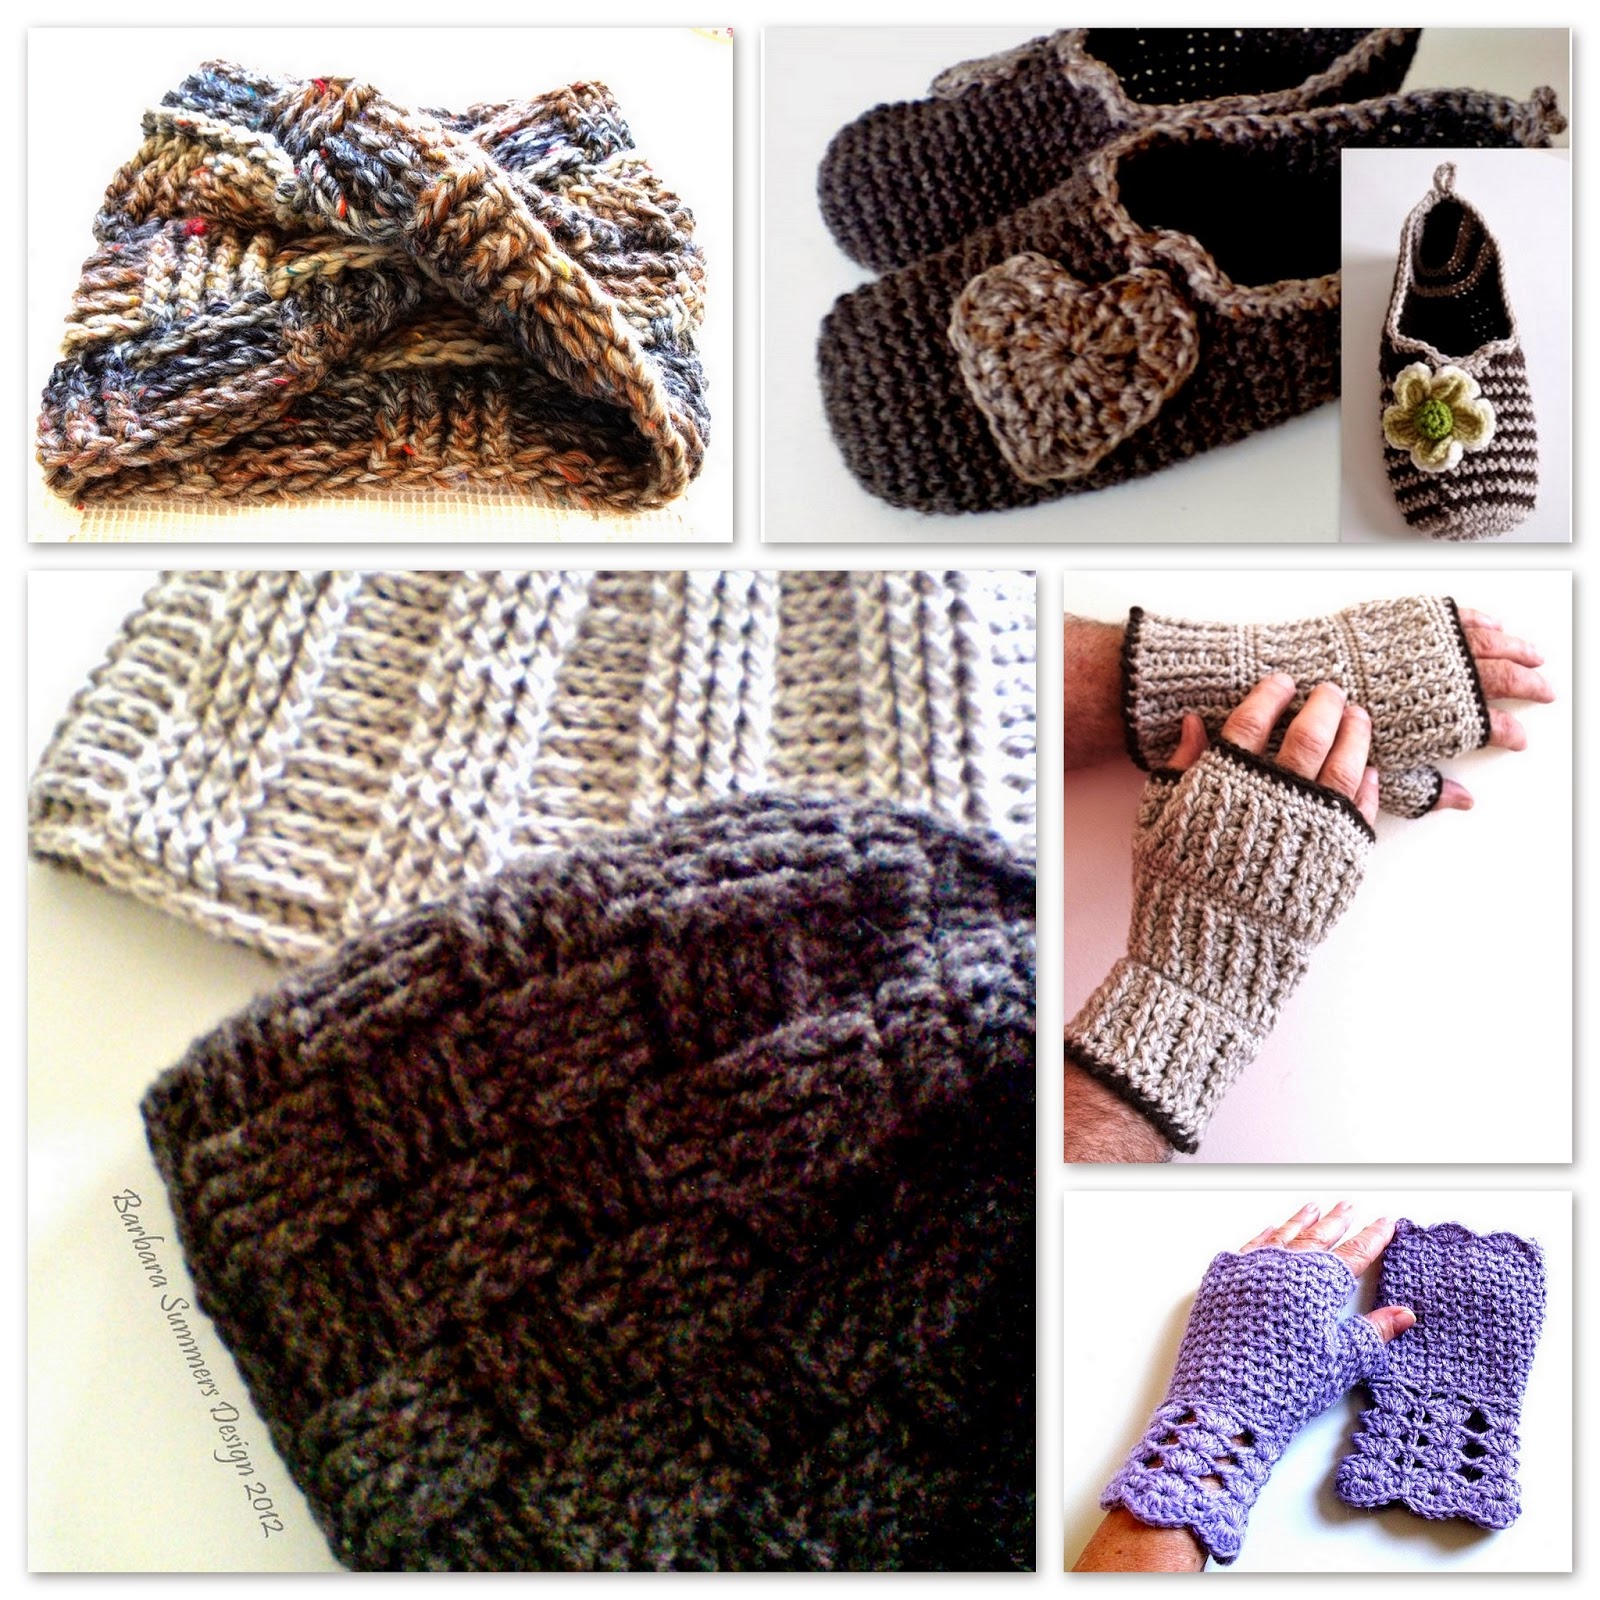 crochet patterns, how to crochet, hats beanies, mittens, slippers, scarves,